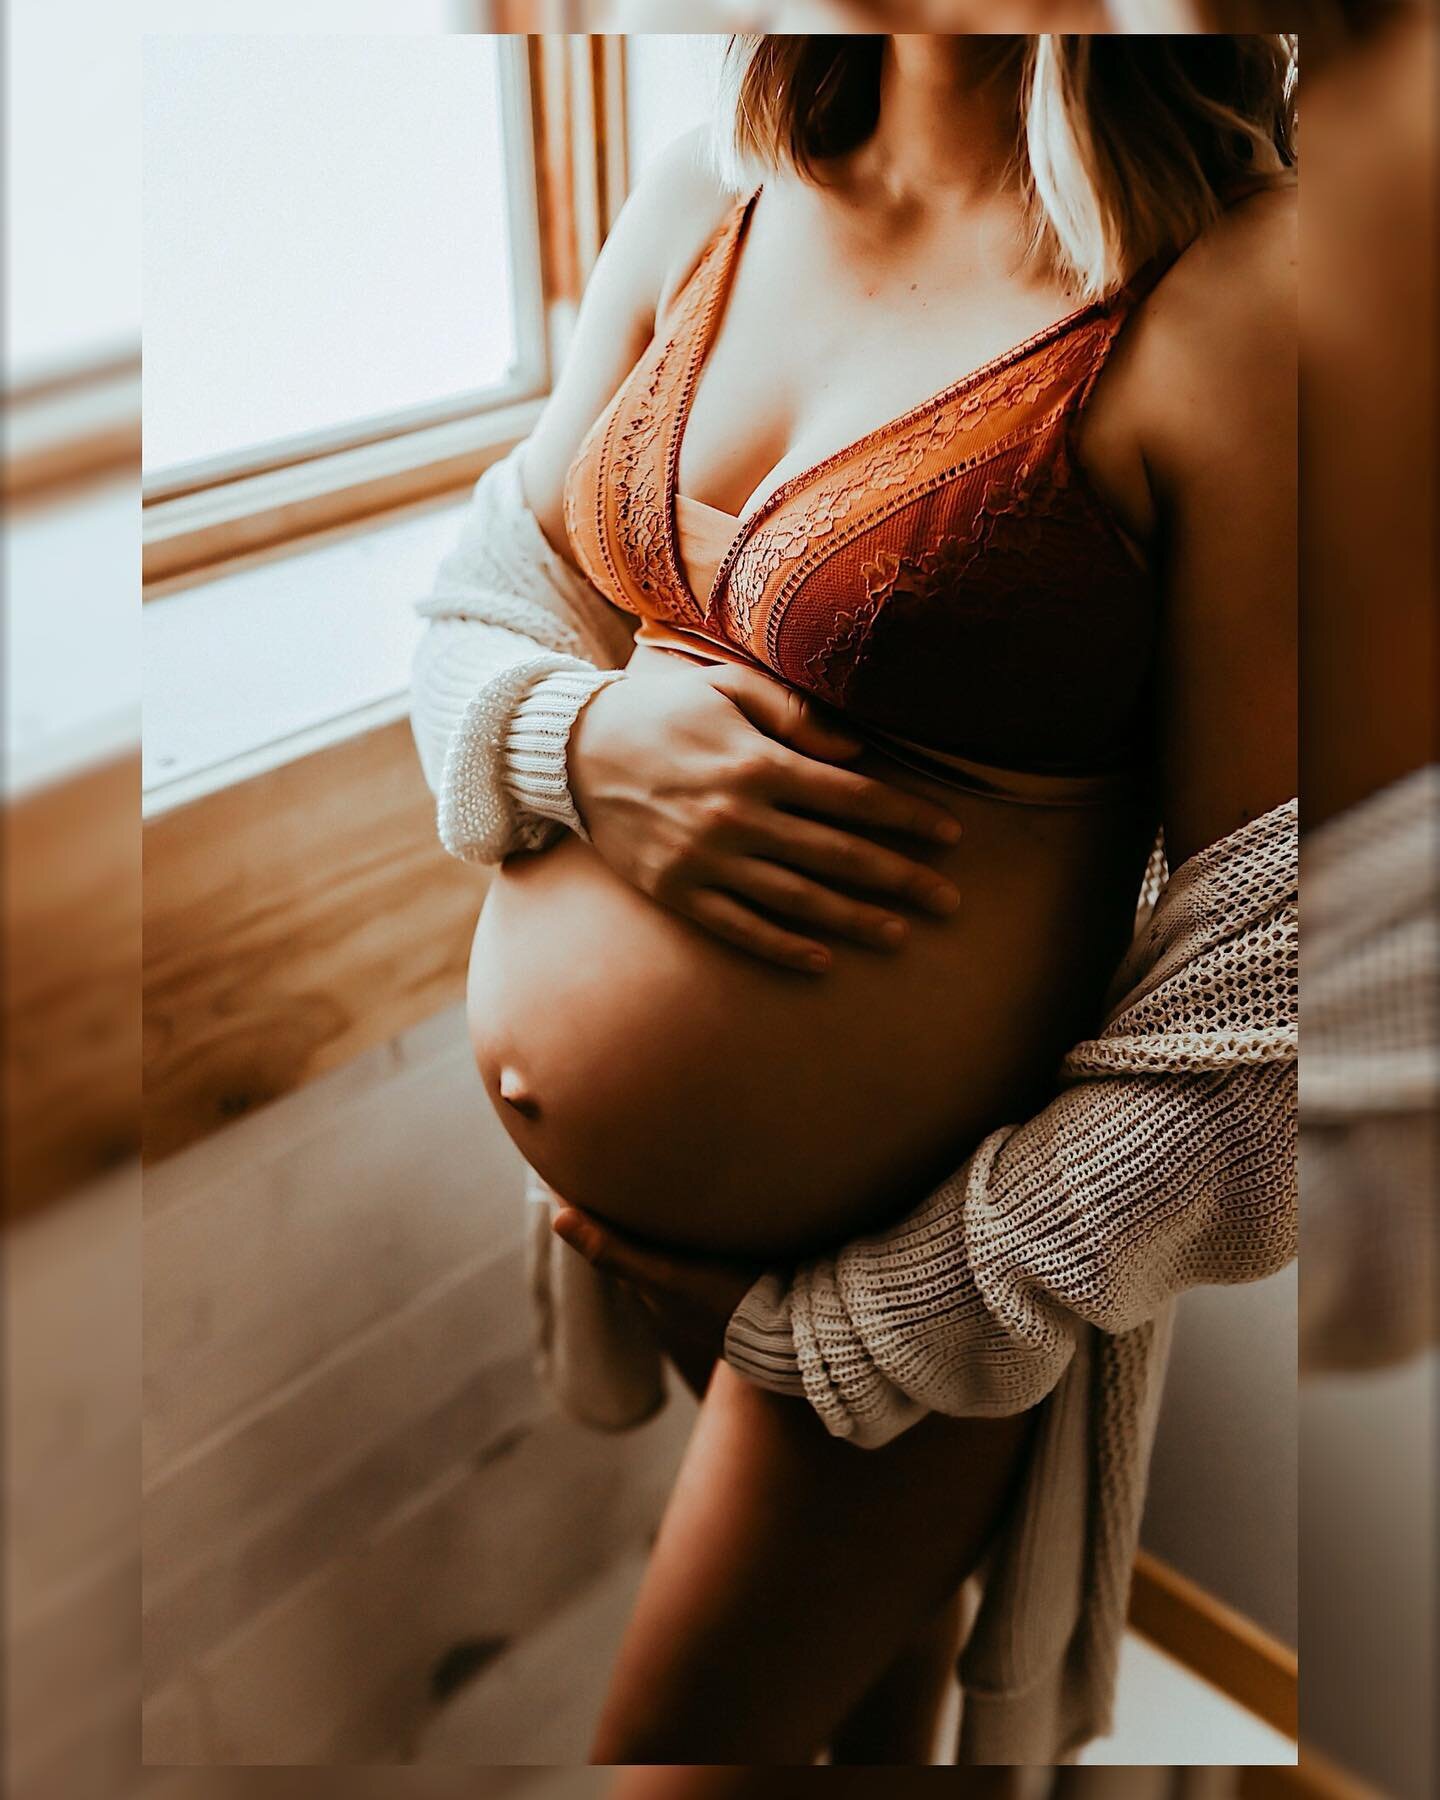 please give me ALL the baby bumps because there&rsquo;s nothing more beautiful than growing life &hearts;️